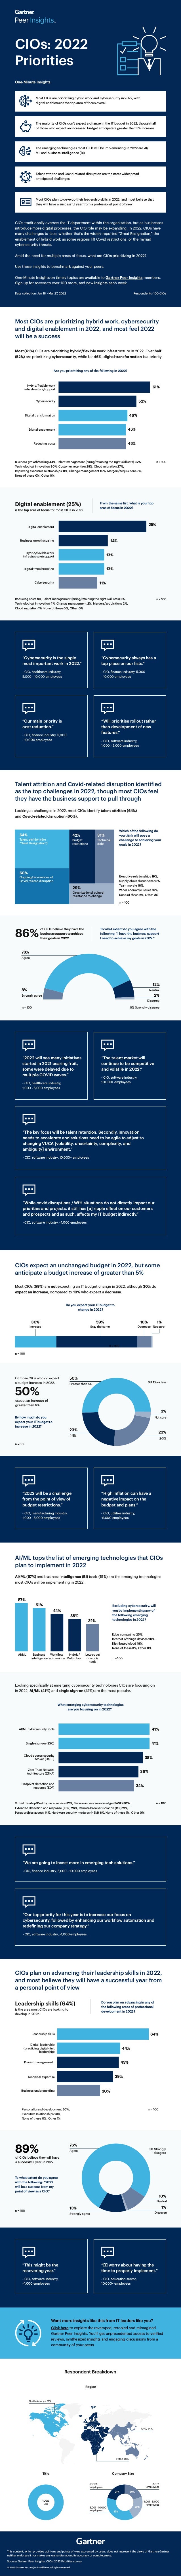 CIOs: 2022
Priorities
Most CIOs are prioritizing hybrid work and cybersecurity in 2022, with
digital enablement the top area of focus overall
The majority of CIOs don’t expect a change in the IT budget in 2022, though half
of those who expect an increased budget anticipate a greater than 5% increase
The emerging technologies most CIOs will be implementing in 2022 are AI/
ML and business intelligence (BI)
Talent attrition and Covid-related disruption are the most widespread
anticipated challenges
Most CIOs plan to develop their leadership skills in 2022, and most believe that
they will have a successful year from a professional point of view
One-Minute Insights:
Data collection: Jan 18 - Mar 27, 2022 Respondents: 100 CIOs
Most (61%) CIOs are prioritizing hybrid/flexible work infrastructure in 2022. Over half
(52%) are prioritizing cybersecurity, while for 46%, digital transformation is a priority.
Most CIOs are prioritizing hybrid work, cybersecurity
and digital enablement in 2022, and most feel 2022
will be a success
Are you prioritizing any of the following in 2022?
Hybrid/flexible work
infrastructure/support
Cybersecurity
Digital transformation
Digital enablement
Reducing costs
61%
52%
46%
45%
45%
Business growth/scaling 44%, Talent management (hiring/retaining the right skill sets) 32%,
Technological innovation 30%, Customer retention 29%, Cloud migration 27%,
Improving executive relationships 11%, Change management 10%, Mergers/acquisitions 7%,
None of these 0%, Other 0%
n = 100
is the top area of focus for most CIOs in 2022
Digital enablement (25%) From the same list, what is your top
area of focus in 2022?
Digital enablement
Business growth/scaling
Hybrid/flexible work
infrastructure/support
Digital transformation
Cybersecurity
25%
14%
13%
13%
11%
Reducing costs 9%, Talent management (hiring/retaining the right skill sets) 6%,
Technological innovation 4%, Change management 2%, Mergers/acquisitions 2%,
Cloud migration 1%, None of these 0%, Other 0%
n = 100
“Cybersecurity is the single
most important work in 2022.”
“Our main priority is
cost reduction.”
- CIO, healthcare industry,
5,000 - 10,000 employees
- CIO, finance industry, 5,000
- 10,000 employees
“Cybersecurity always has a
top place on our lists.”
“Will prioritise rollout rather
than development of new
features.”
- CIO, finance industry, 5,000
- 10,000 employees
- CIO, software industry,
1,000 - 5,000 employees
Looking at challenges in 2022, most CIOs identify talent attrition (64%)
and Covid-related disruption (60%).
Talent attrition and Covid-related disruption identified
as the top challenges in 2022, though most CIOs feel
they have the business support to pull through
Which of the following do
you think will pose a
challenge to achieving your
goals in 2022?
Executive relationships 19%,
Supply chain disruptions 18%,
Team morale 18%,
Wider economic issues 16%,
None of these 2%, Other 0%
64% 42%
29%
31%
60%
Talent attrition (the
“Great Resignation”)
Budget
restrictions
Organizational cultural
resistance to change
Technical
debt
Ongoing/recurrences of
Covid-related disruption
of CIOs believe they have the
business support to achieve
their goals in 2022.
To what extent do you agree with the
following: “I have the business support
I need to achieve my goals in 2022.”
78%
8%
Agree
Strongly agree 2%
Disagree
0% Strongly disagree
12%
Neutral
n = 100
n = 100
86%
“2022 will see many initiatives
started in 2021 bearing fruit,
some were delayed due to
multiple COVID waves.”
- CIO, healthcare industry,
1,000 - 5,000 employees
“The talent market will
continue to be competitive
and volatile in 2022.”
- CIO, software industry,
10,000+ employees
“The key focus will be talent retention. Secondly, innovation
needs to accelerate and solutions need to be agile to adjust to
changing VUCA [volatility, uncertainty, complexity, and
ambiguity] environment.”
- CIO, software industry, 10,000+ employees
“While covid disruptions / WfH situations do not directly impact our
priorities and projects, it still has [a] ripple effect on our customers
and prospects and as such, affects my IT budget indirectly.”
- CIO, software industry, <1,000 employees
Most CIOs (59%) are not expecting an IT budget change in 2022, although 30% do
expect an increase, compared to 10% who expect a decrease.
Of those CIOs who do expect
a budget increase in 2022,
expect an increase of
greater than 5%.
CIOs expect an unchanged budget in 2022, but some
anticipate a budget increase of greater than 5%
30% 59% 10% 1%
Increase Stay the same Decrease Not sure
Do you expect your IT budget to
change in 2022?
By how much do you
expect your IT budget to
increase in 2022?
50%
23%
Greater than 5%
4-5%
23%
3%
Not sure
2-3%
0% 1% or less
n = 100
n = 100
n = 30
n = 100
n = 100
50%
“2022 will be a challenge
from the point of view of
budget restrictions.”
- CIO, manufacturing industry,
1,000 - 5,000 employees
“High inflation can have a
negative impact on the
budget and plans.”
- CIO, utilities industry,
<1,000 employees
AI/ML (57%) and business intelligence (BI) tools (51%) are the emerging technologies
most CIOs will be implementing in 2022.
AI/ML tops the list of emerging technologies that CIOs
plan to implement in 2022
Excluding cybersecurity, will
you be implementing any of
the following emerging
technologies in 2022?
AI/ML Business
intelligence
Workflow
automation
Hybrid/
Multi-cloud
Low-code/
no-code
tools
57%
51%
44%
38%
32%
Edge computing 25%,
Internet of things devices 20%,
Distributed cloud 18%,
None of these 3%, Other 0%
Looking specifically at emerging cybersecurity technologies CIOs are focusing on
in 2022, AI/ML (41%) and single sign-on (41%) are the most popular.
What emerging cybersecurity technologies
are you focusing on in 2022?
AI/ML cybersecurity tools
Single sign-on (SSO)
Cloud access security
broker (CASB)
Zero Trust Network
Architecture (ZTNA)
Endpoint detection and
response (EDR)
41%
41%
38%
36%
34%
Virtual desktop/Desktop as a service 32%, Secure access service edge (SASE) 30%,
Extended detection and response (XDR) 26%, Remote browser isolation (RBI) 21%,
Passwordless access 14%, Hardware security modules (HSM) 6%, None of these 1%, Other 0%
“We are going to invest more in emerging tech solutions.”
- CIO, finance industry, 5,000 - 10,000 employees
“Our top priority for this year is to increase our focus on
cybersecurity, followed by enhancing our workflow automation and
redefining our company strategy.”
- CIO, software industry, <1,000 employees
CIOs plan on advancing their leadership skills in 2022,
and most believe they will have a successful year from
a personal point of view
is the area most CIOs are looking to
develop in 2022.
Leadership skills (64%) Do you plan on advancing in any of
the following areas of professional
development in 2022?
Leadership skills
Digital leadership
(practicing digital-first
leadership)
Project management
Technical expertise
Business understanding
64%
44%
43%
39%
30%
Personal brand development 30%,
Executive relationships 28%,
None of these 0%, Other 1%
n = 100
of CIOs believe they will have
a successful year in 2022.
To what extent do you agree
with the following: “2022
will be a success from my
point of view as a CIO.”
76%
13%
Agree
Strongly agree
1%
10%
Neutral
Disagree
0% Strongly
disagree
n = 100
89%
“This might be the
recovering year.”
- CIO, software industry,
<1,000 employees
“[I] worry about having the
time to properly implement.”
- CIO, education sector,
10,000+ employees
Respondent Breakdown
Region
North America 61%
APAC 14%
EMEA 25%
10,001+
employees
100%
CIO
<1,001
employees
Company Size
Title
5,001 - 10,000
employees
1,001 - 5,000
employees
20%
21%
37%
22%
This content, which provides opinions and points of view expressed by users, does not represent the views of Gartner; Gartner
neither endorses it nor makes any warranties about its accuracy or completeness.
Source: Gartner Peer Insights, CIOs: 2022 Priorities survey
© 2022 Gartner, Inc. and/or its affiliates. All rights reserved.
CIOs traditionally oversee the IT department within the organization, but as businesses
introduce more digital processes, the CIO role may be expanding. In 2022, CIOs have
many challenges to face, whether that’s the widely-reported “Great Resignation,” the
enablement of hybrid work as some regions lift Covid restrictions, or the myriad
cybersecurity threats.
Amid the need for multiple areas of focus, what are CIOs prioritizing in 2022?
Use these insights to benchmark against your peers.
One-Minute Insights on timely topics are available to Gartner Peer Insights members.
Sign up for access to over 100 more, and new insights each week.
Want more insights like this from IT leaders like you?
Click here to explore the revamped, retooled and reimagined
Gartner Peer Insights. You’ll get unprecedented access to verified
reviews, synthesized insights and engaging discussions from a
community of your peers.
 